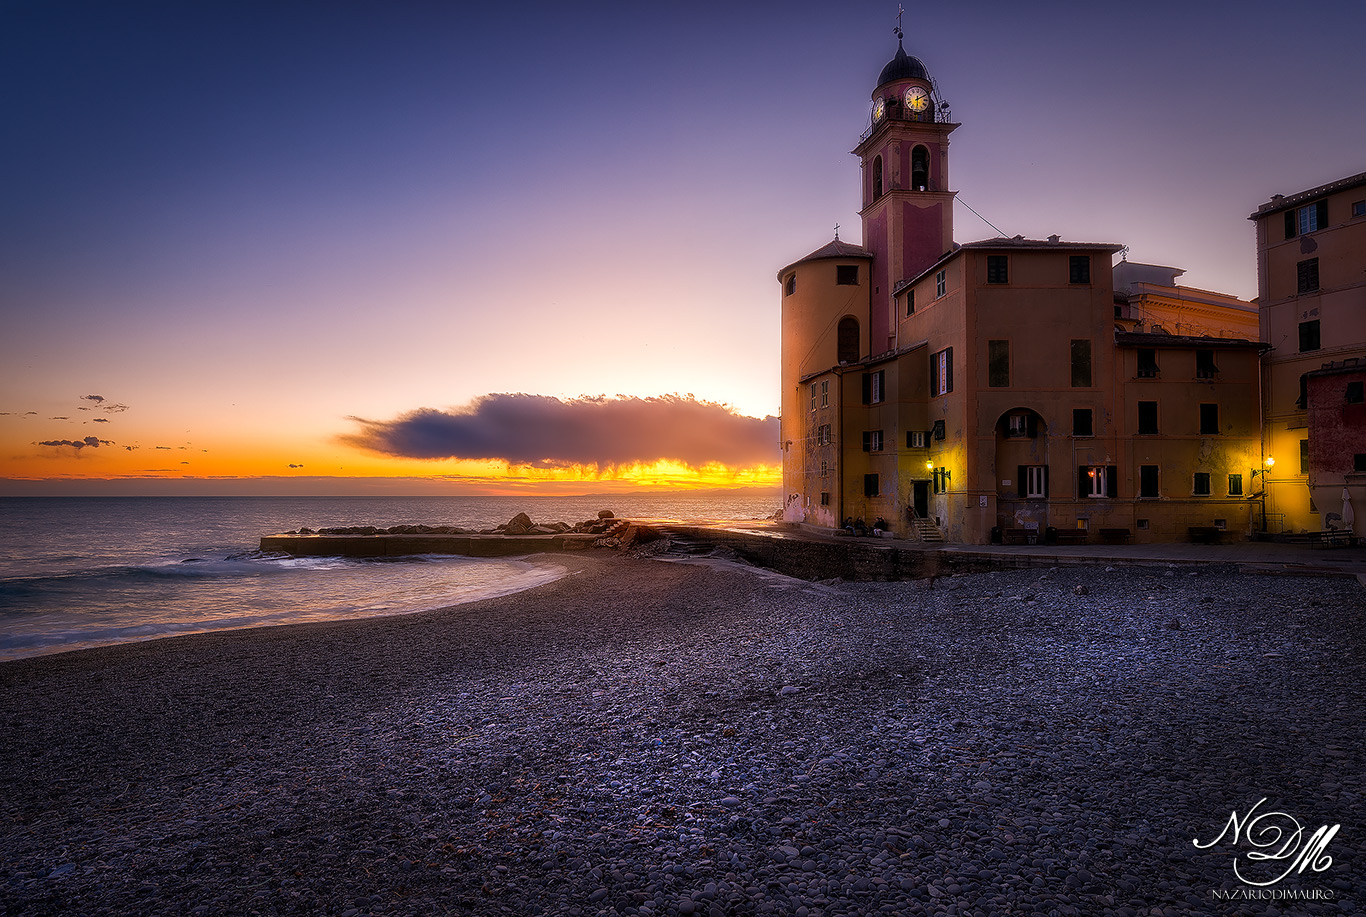 Camogli from another point of view...